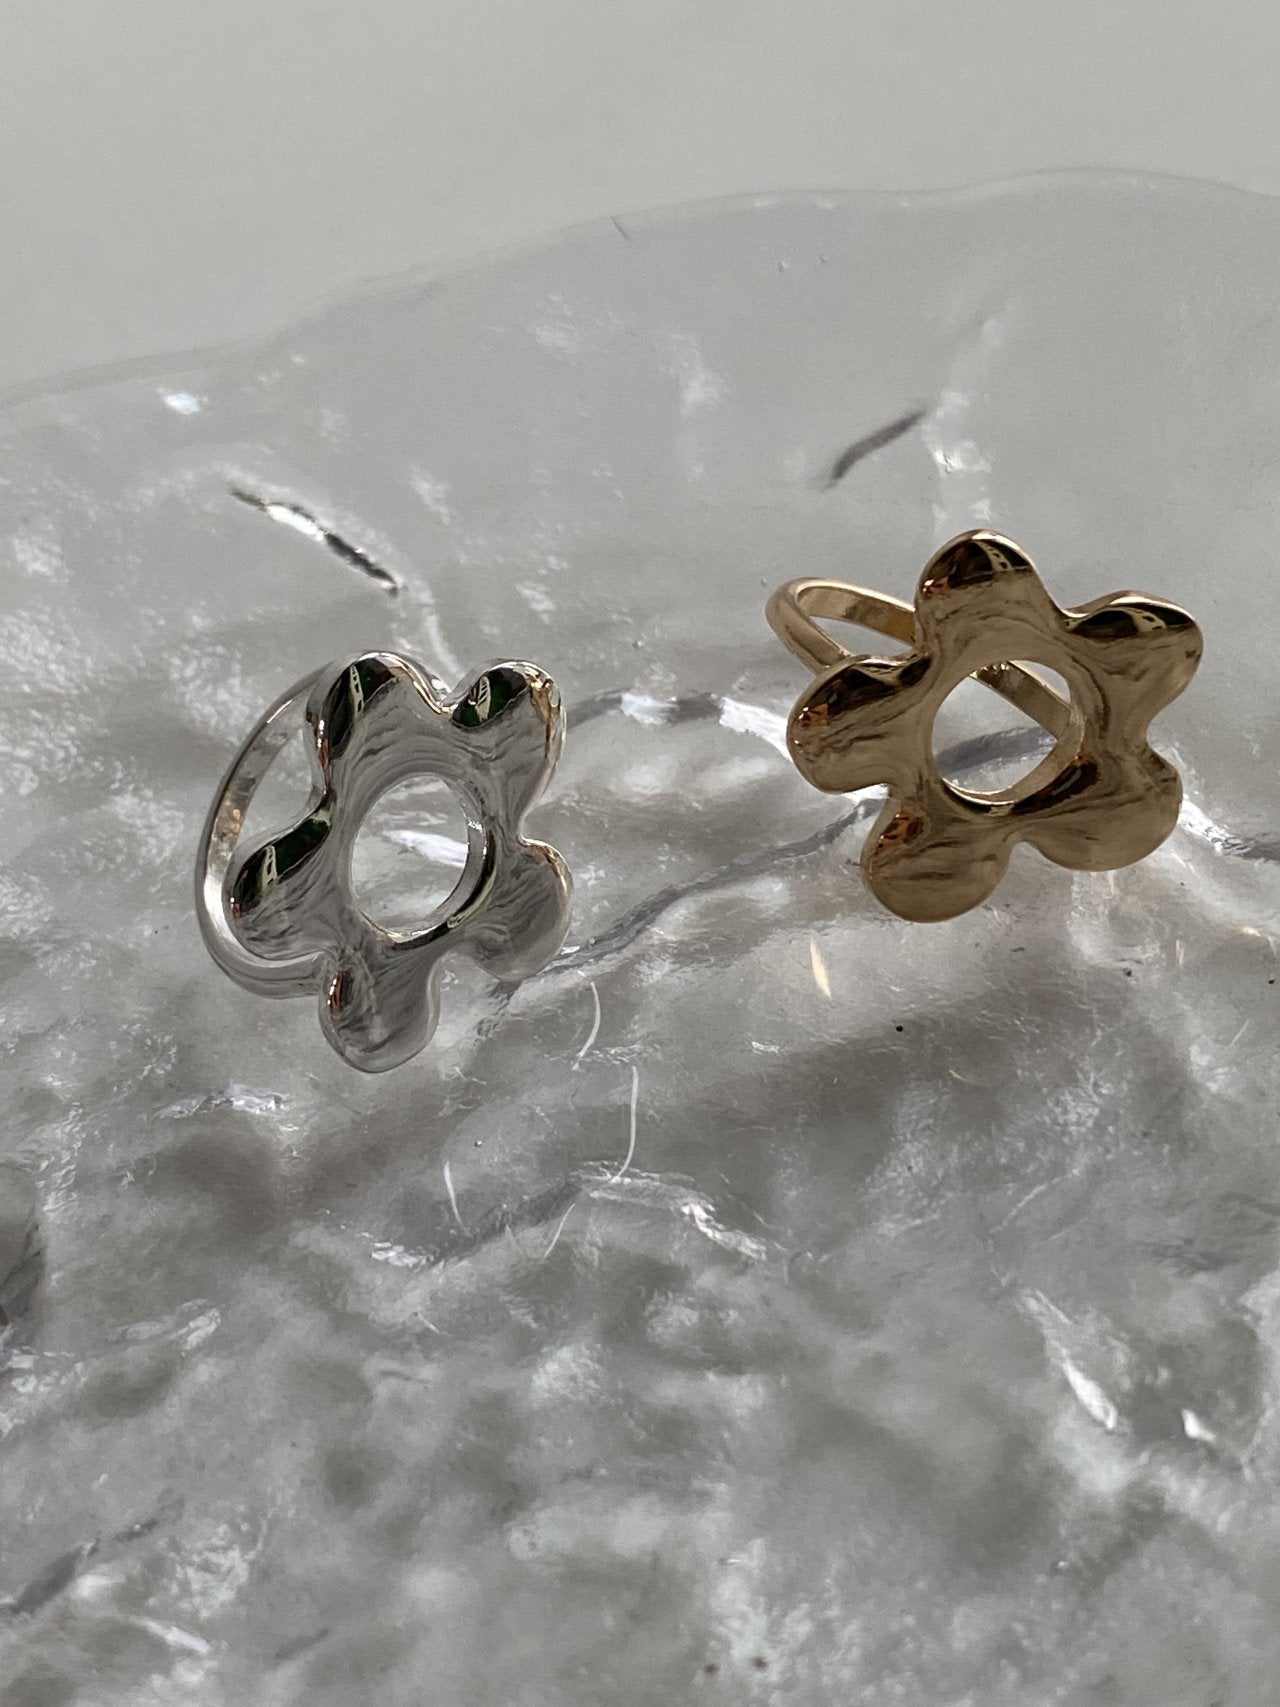 【Must Have】Flower Ring